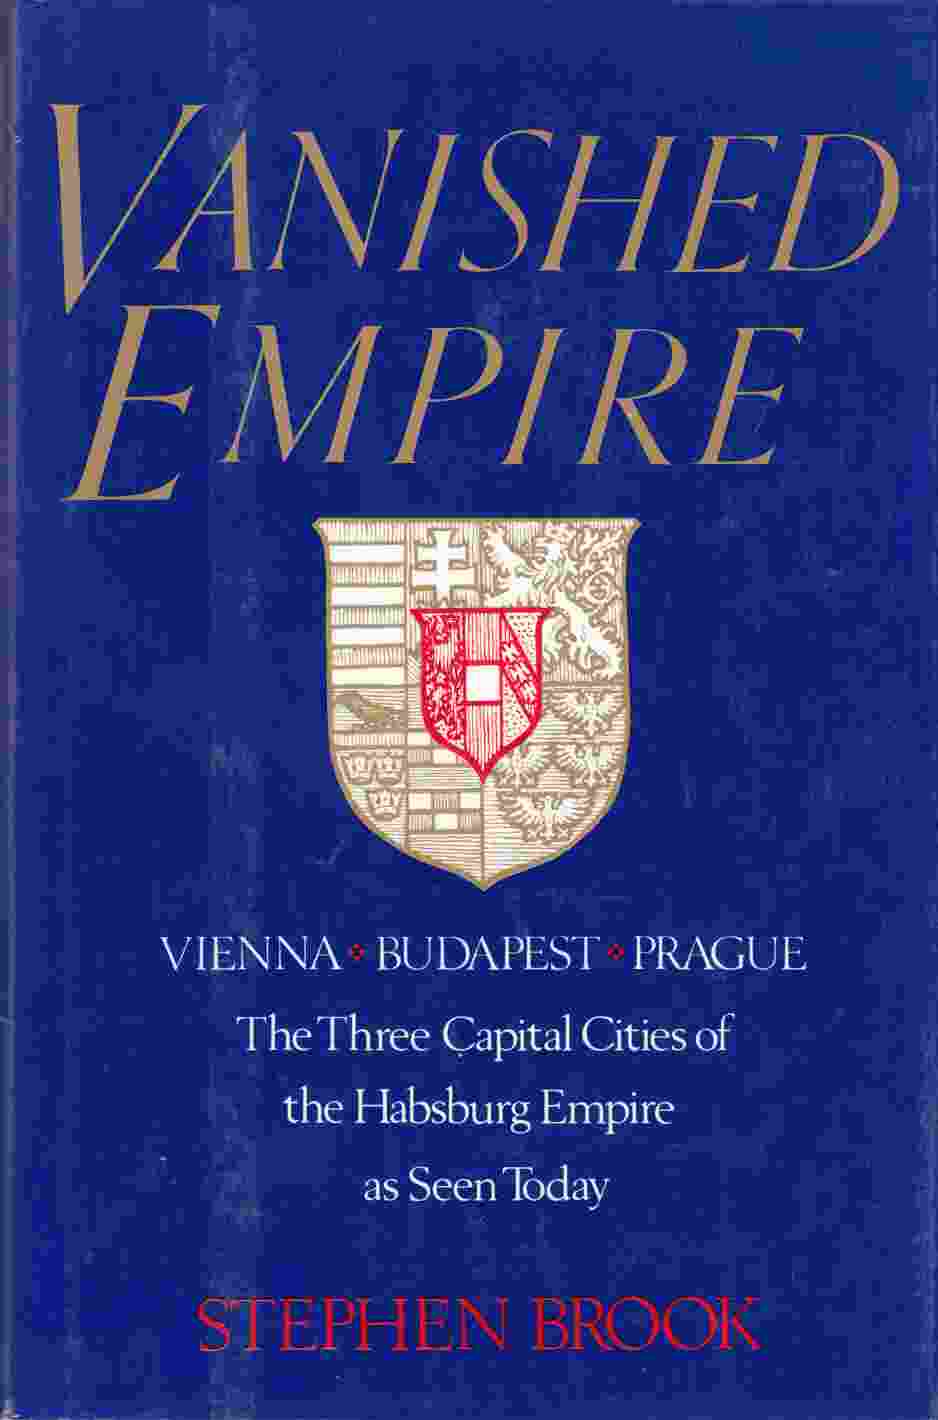 Image for Vanished Empire Vienna, Budapest, Prague: The Three Capital Cities of the Habsburg Empire As Seen Today